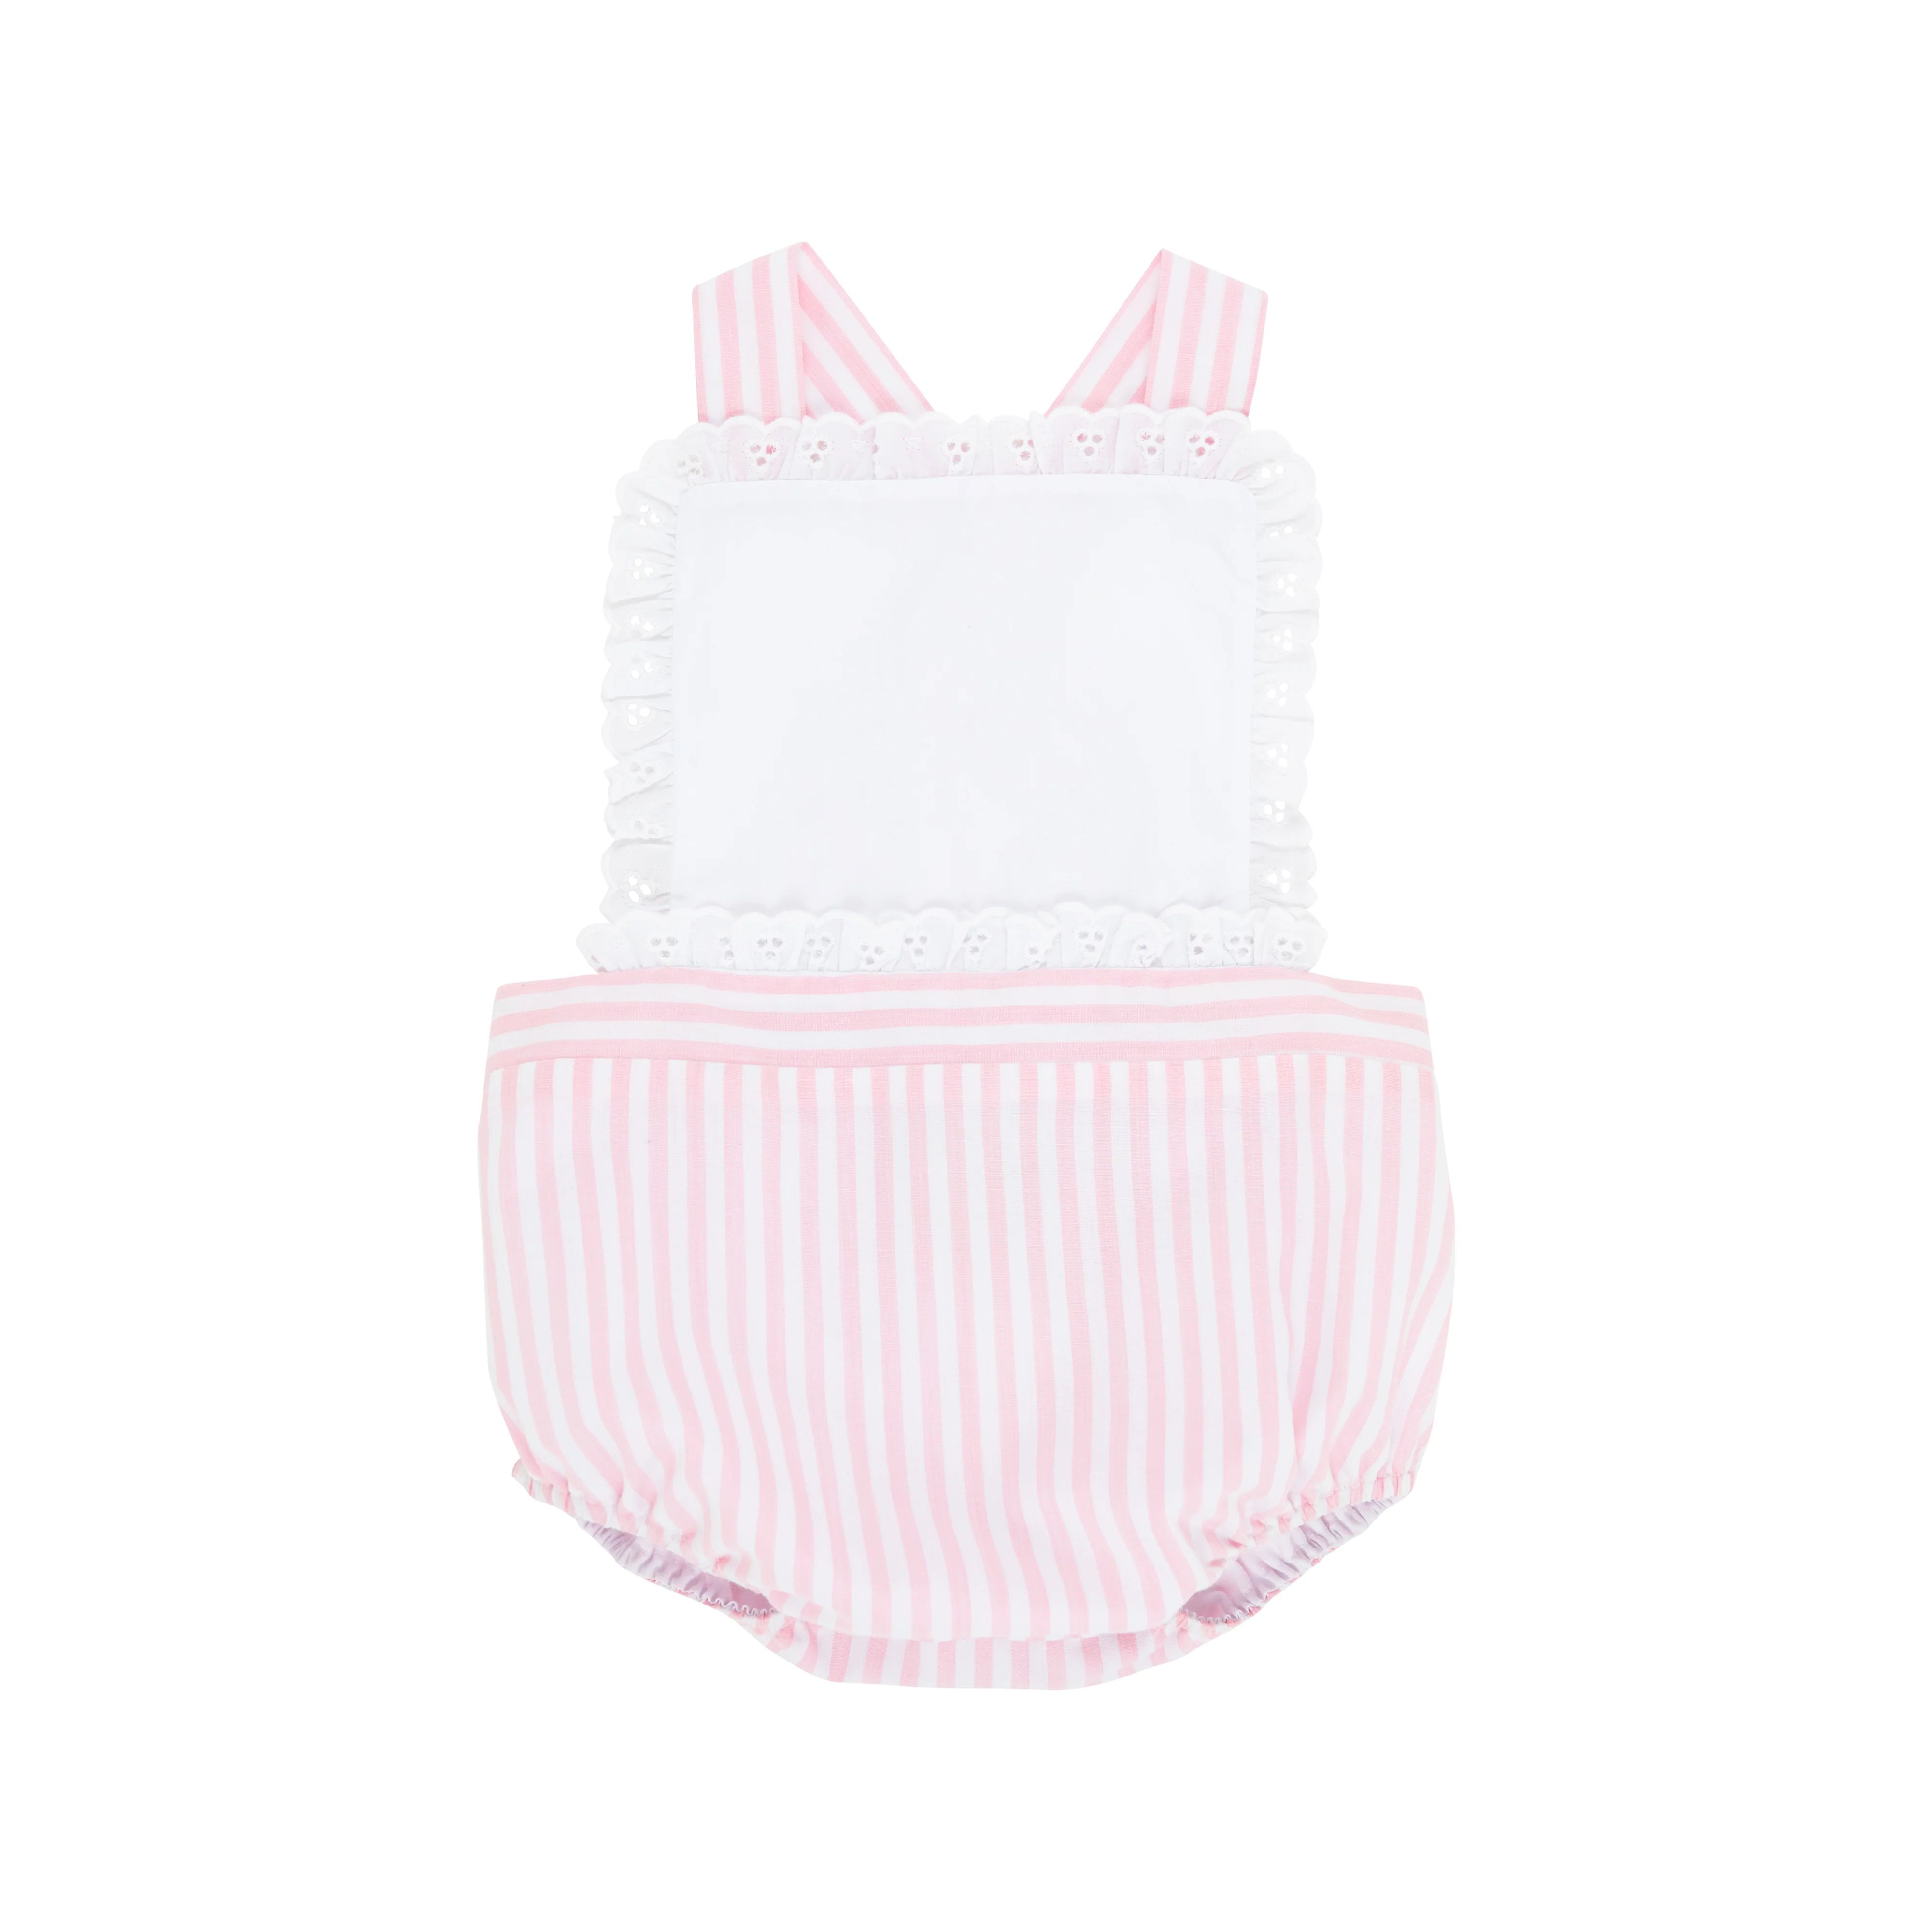 Sally Sunsuit - Worth Avenue White & Pinkney Pink Stripe with Worth Avenue White Eyelet | The Beaufort Bonnet Company